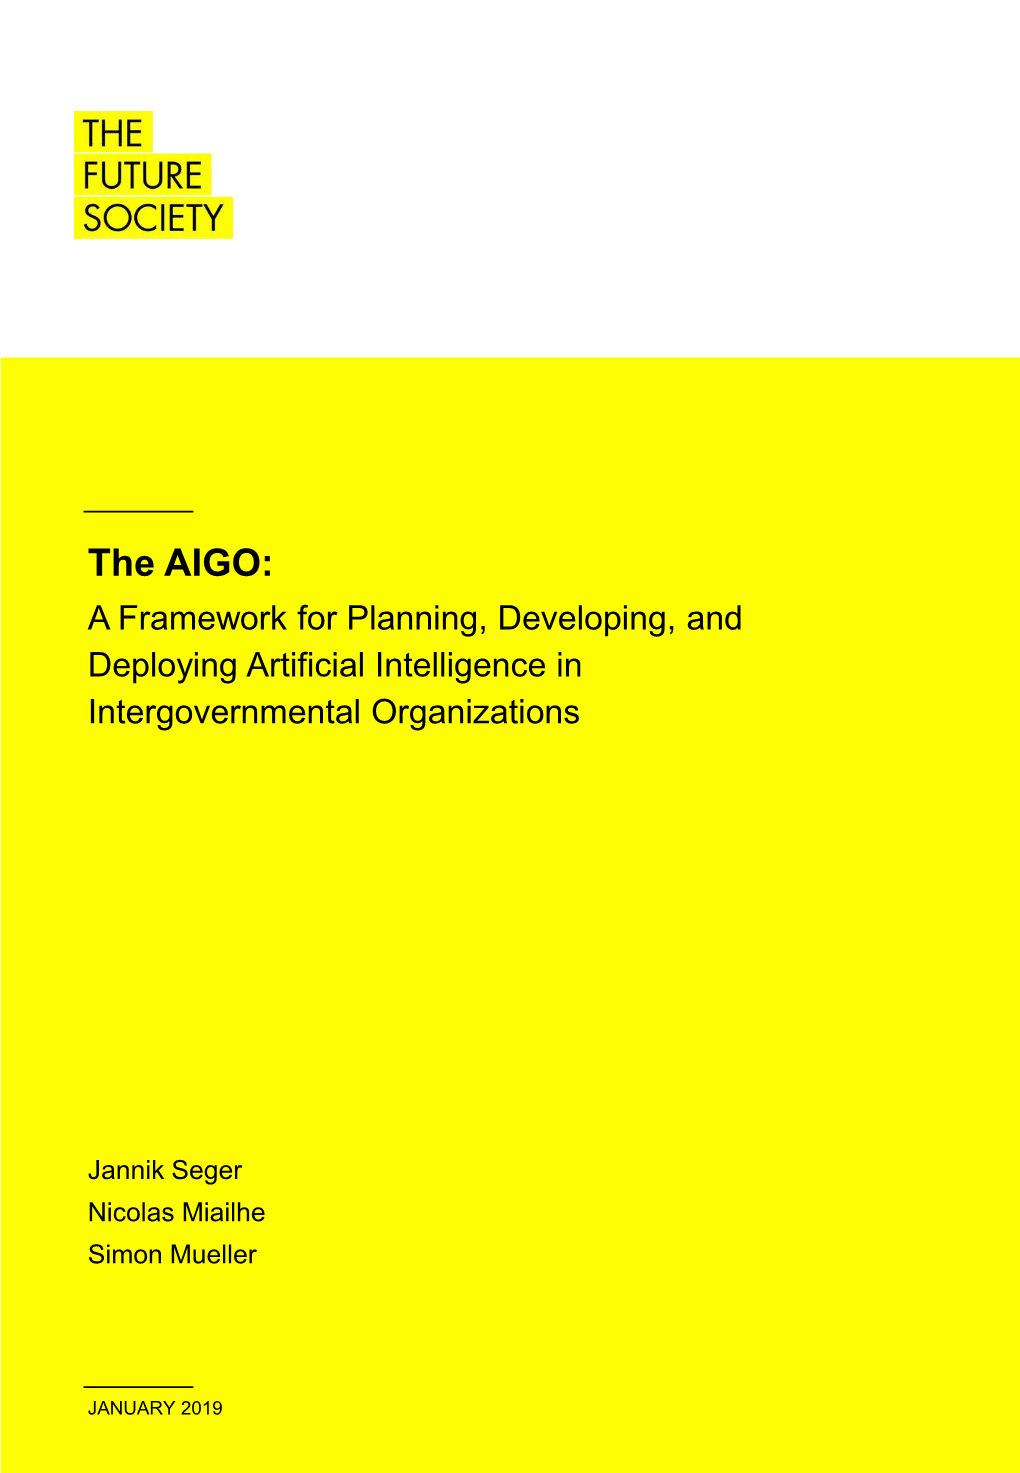 The AIGO: a Framework for Planning, Developing, and Deploying Artificial Intelligence in Intergovernmental Organizations